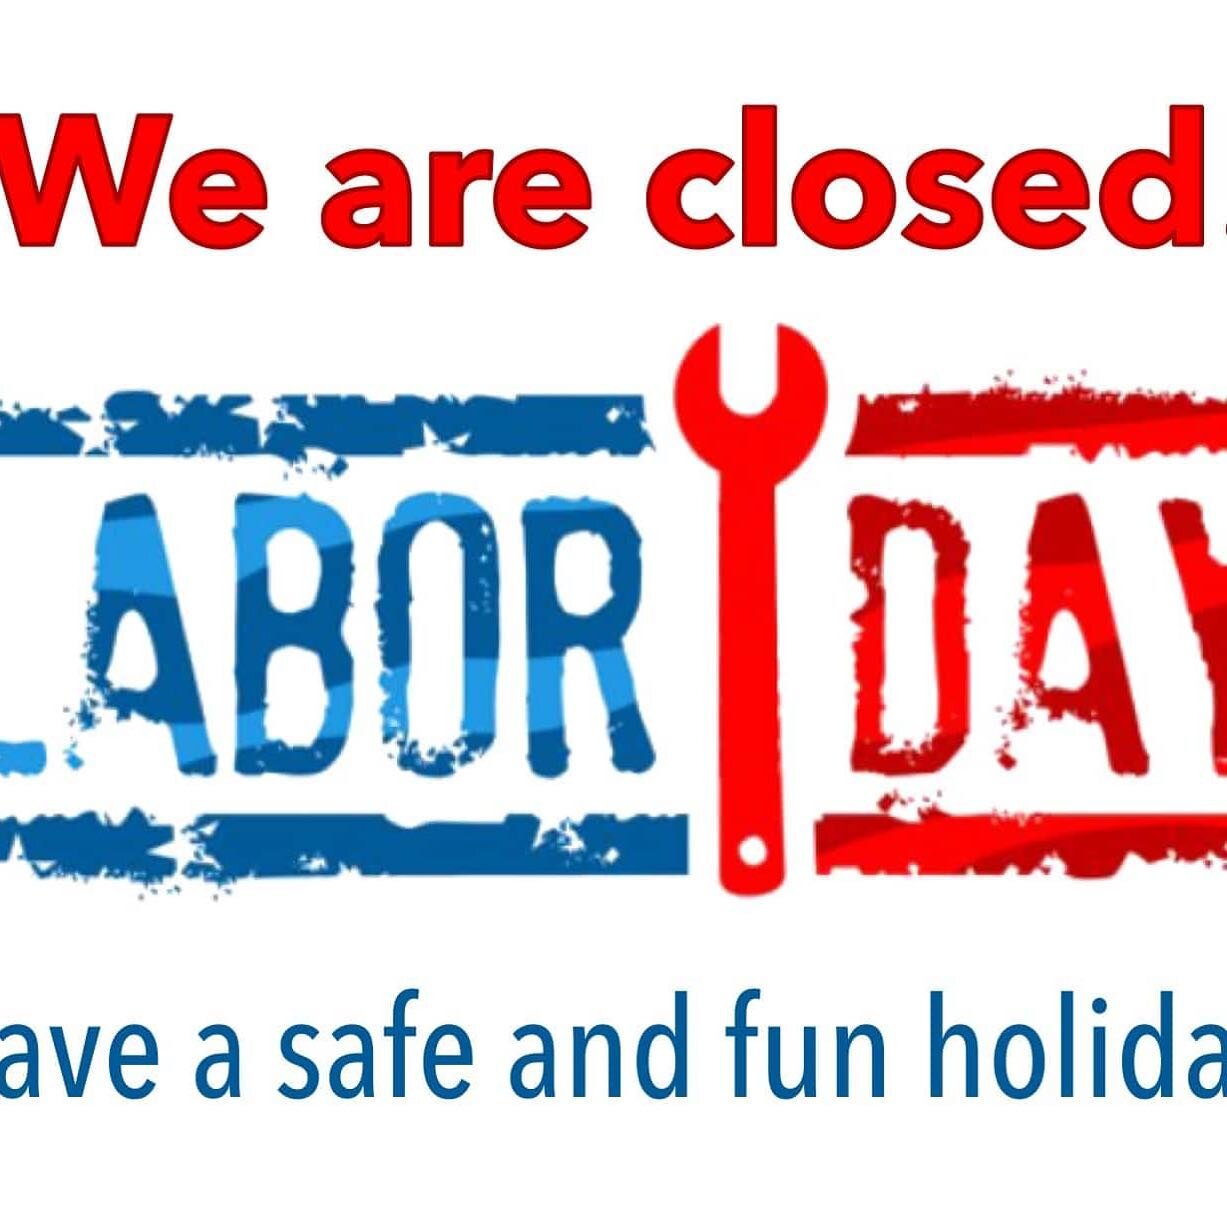 Quincy Public Market will be closed Monday September 7th, 2020 for Labor Day. Jones of Washington will be open but the remaining businesses will all be closed! Have a safe day!